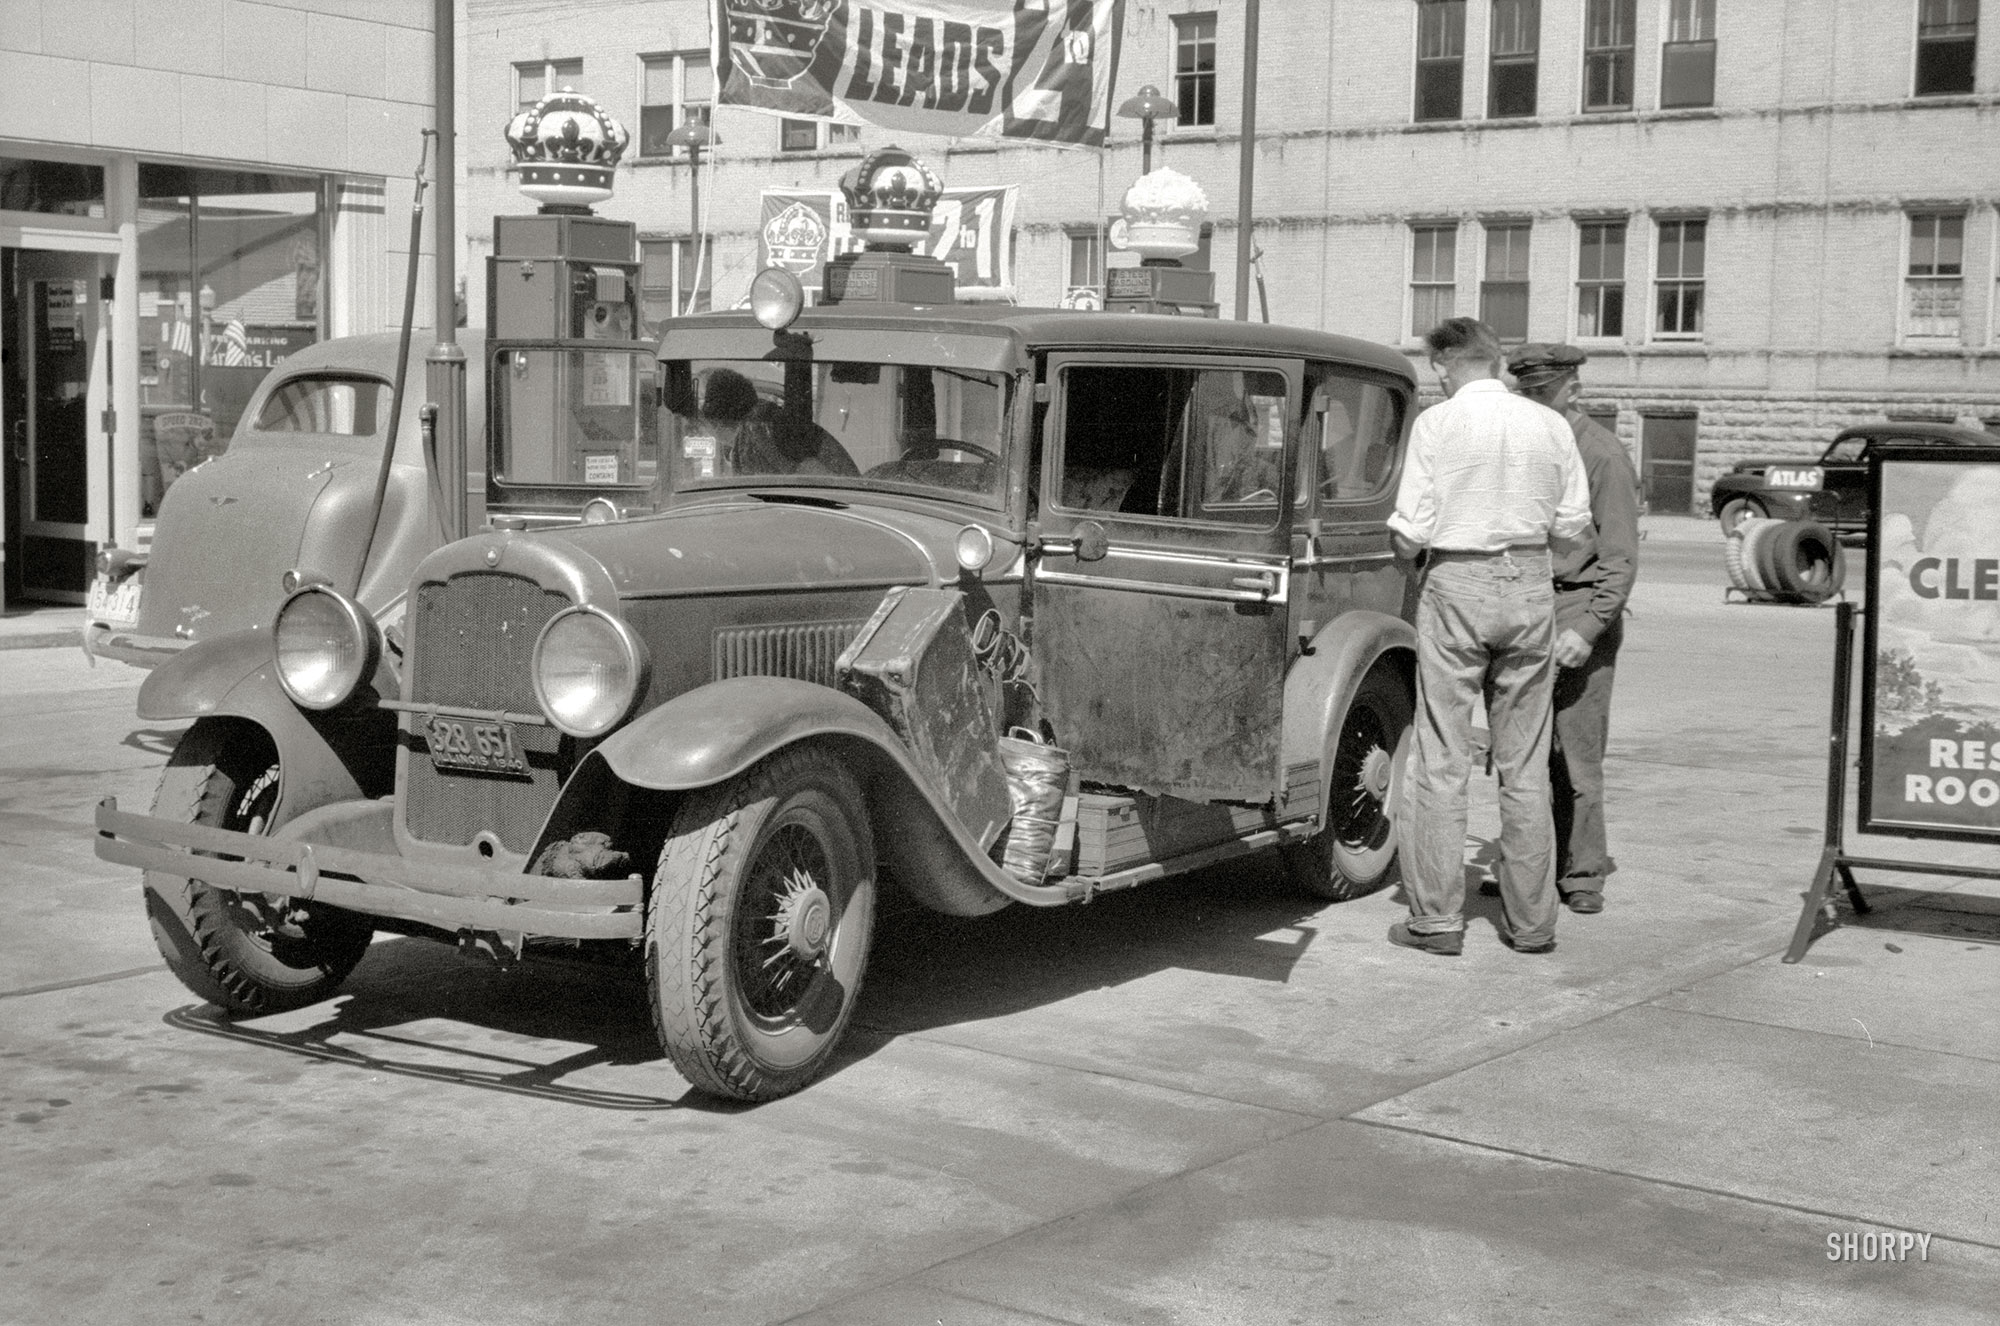 July 1940. "Auto of migrant fruit worker at gas station in Sturgeon Bay, Wisconsin." The other end of the jalopy we saw here. 35mm nitrate negative by John Vachon for the Farm Security Administration. View full size.